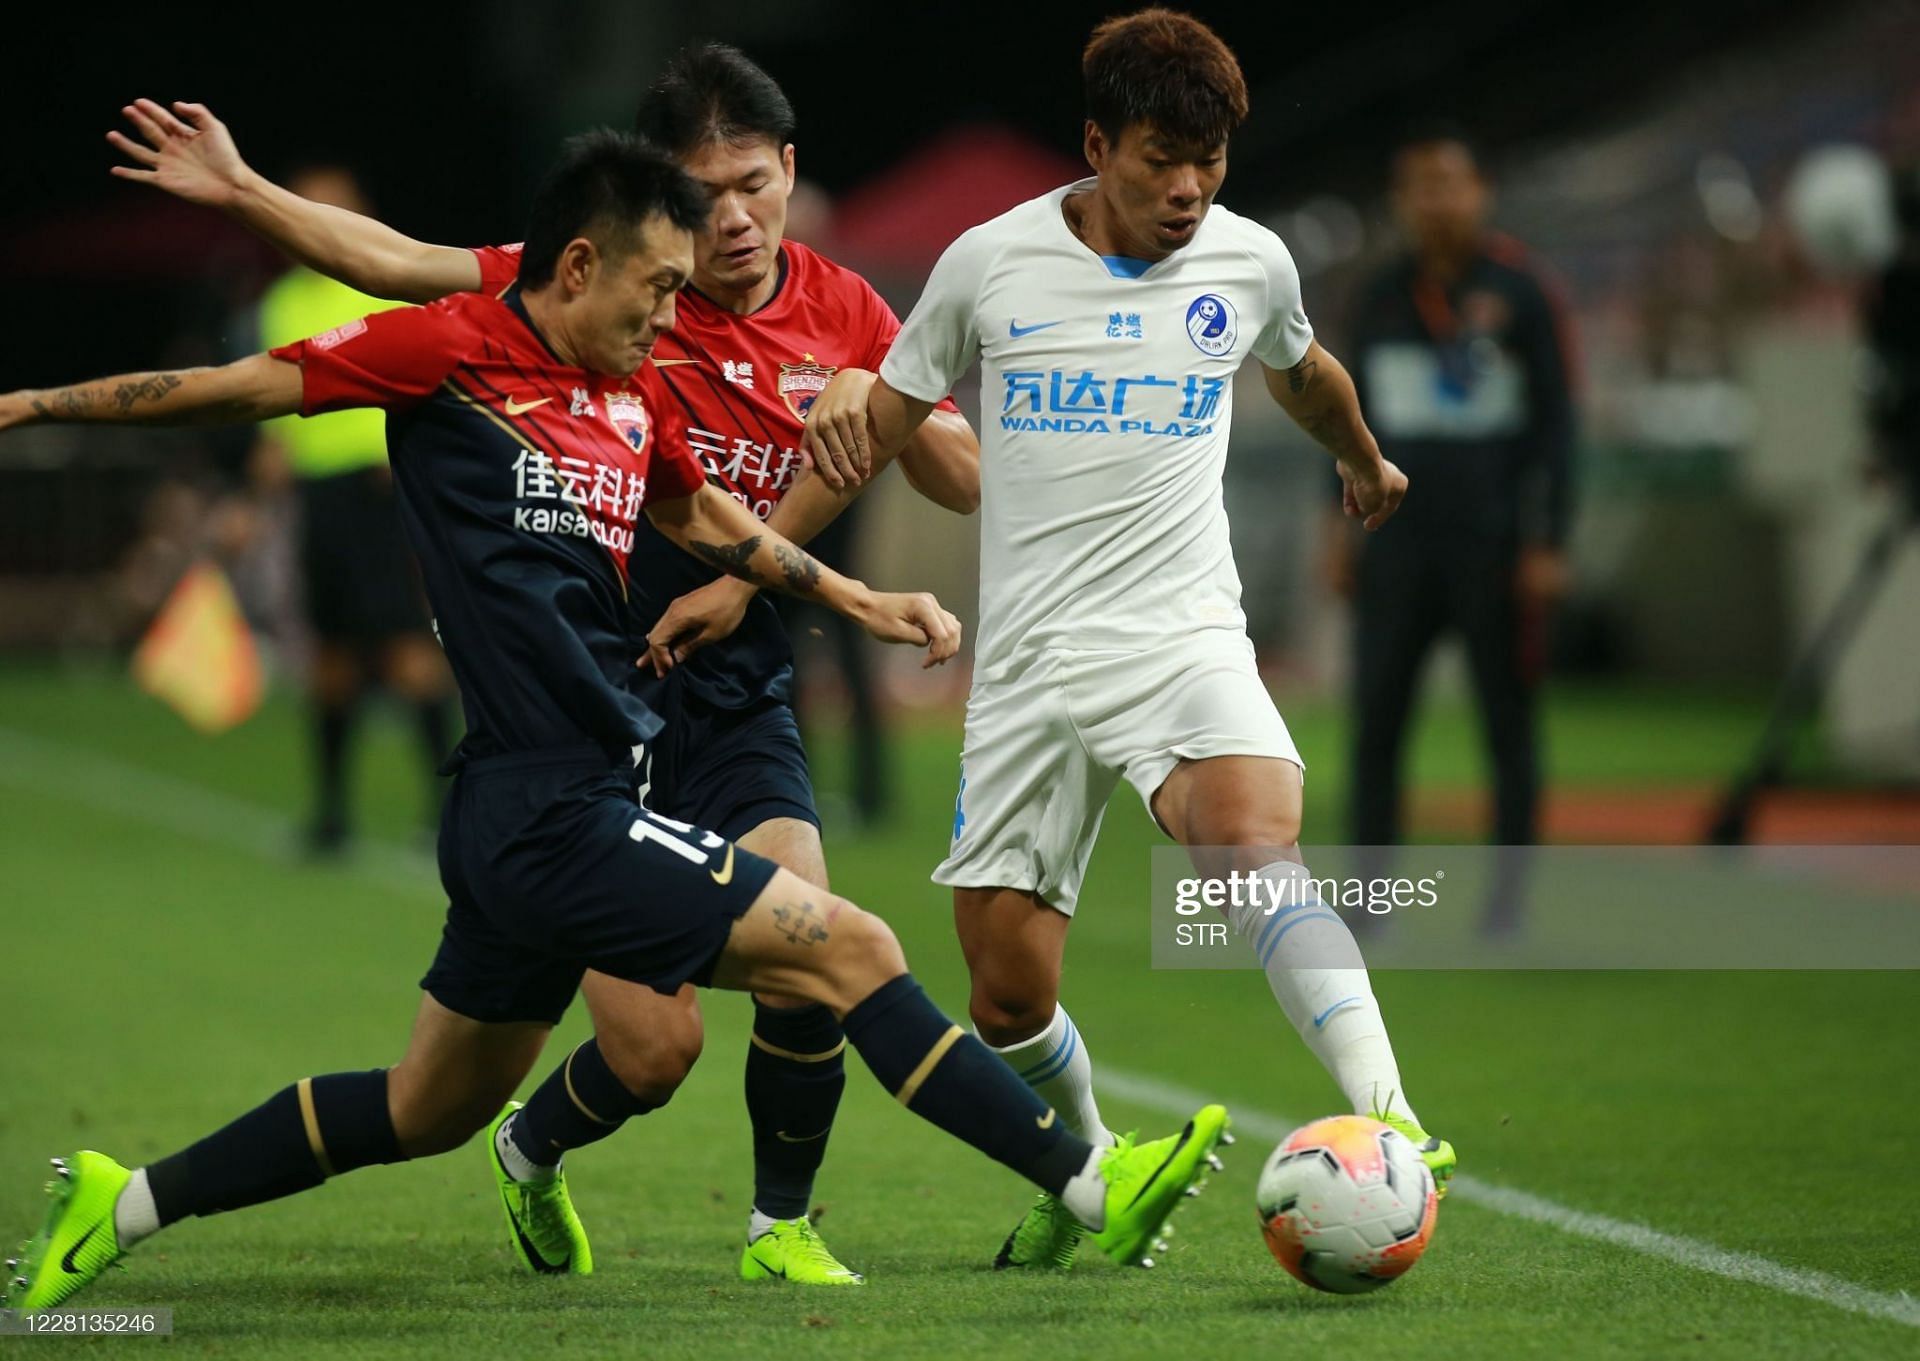 Dalian Pro will be looking to win the game